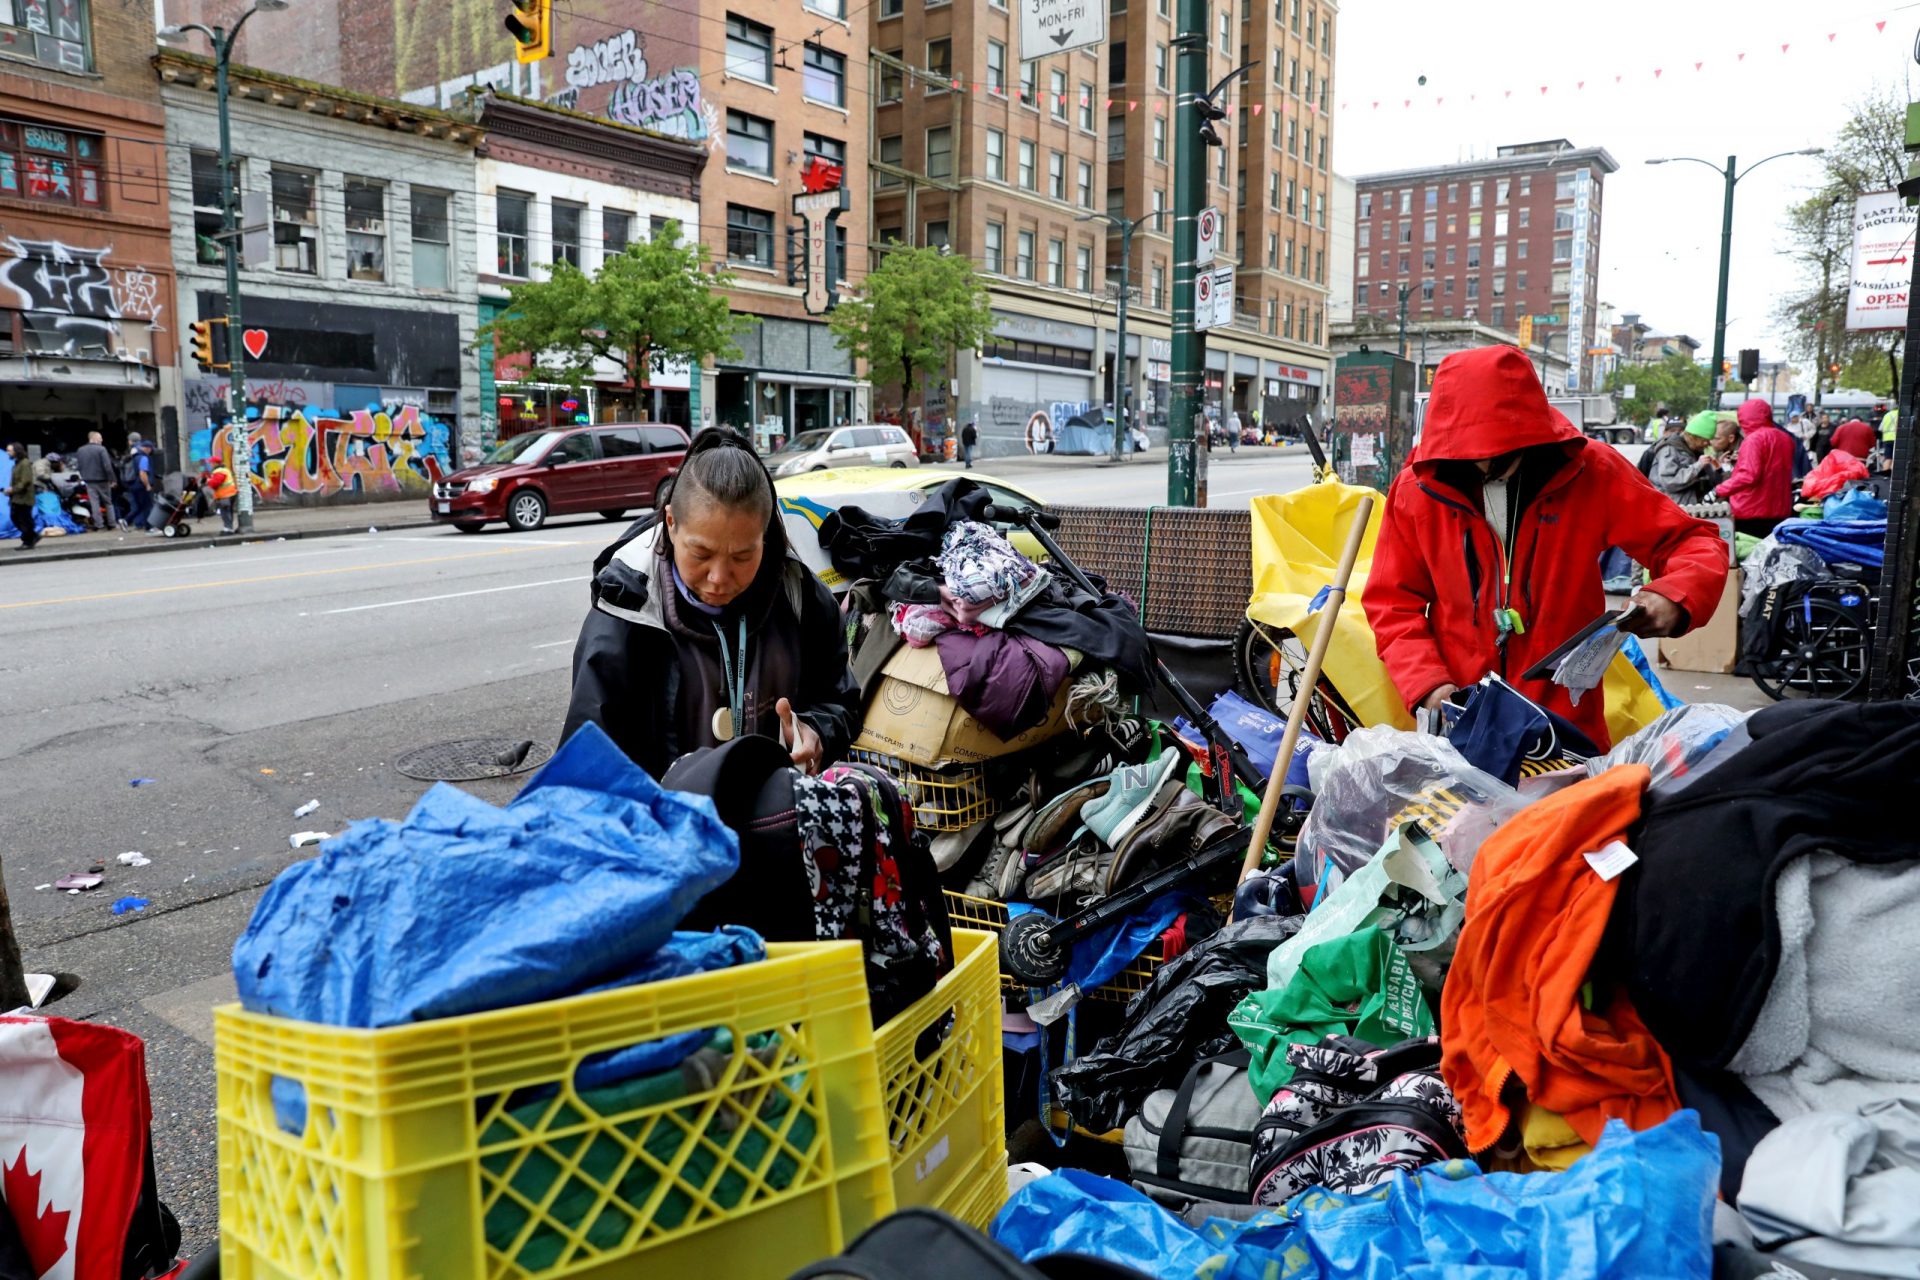 Researchers gave homeless people $7,500. Here’s what happened.